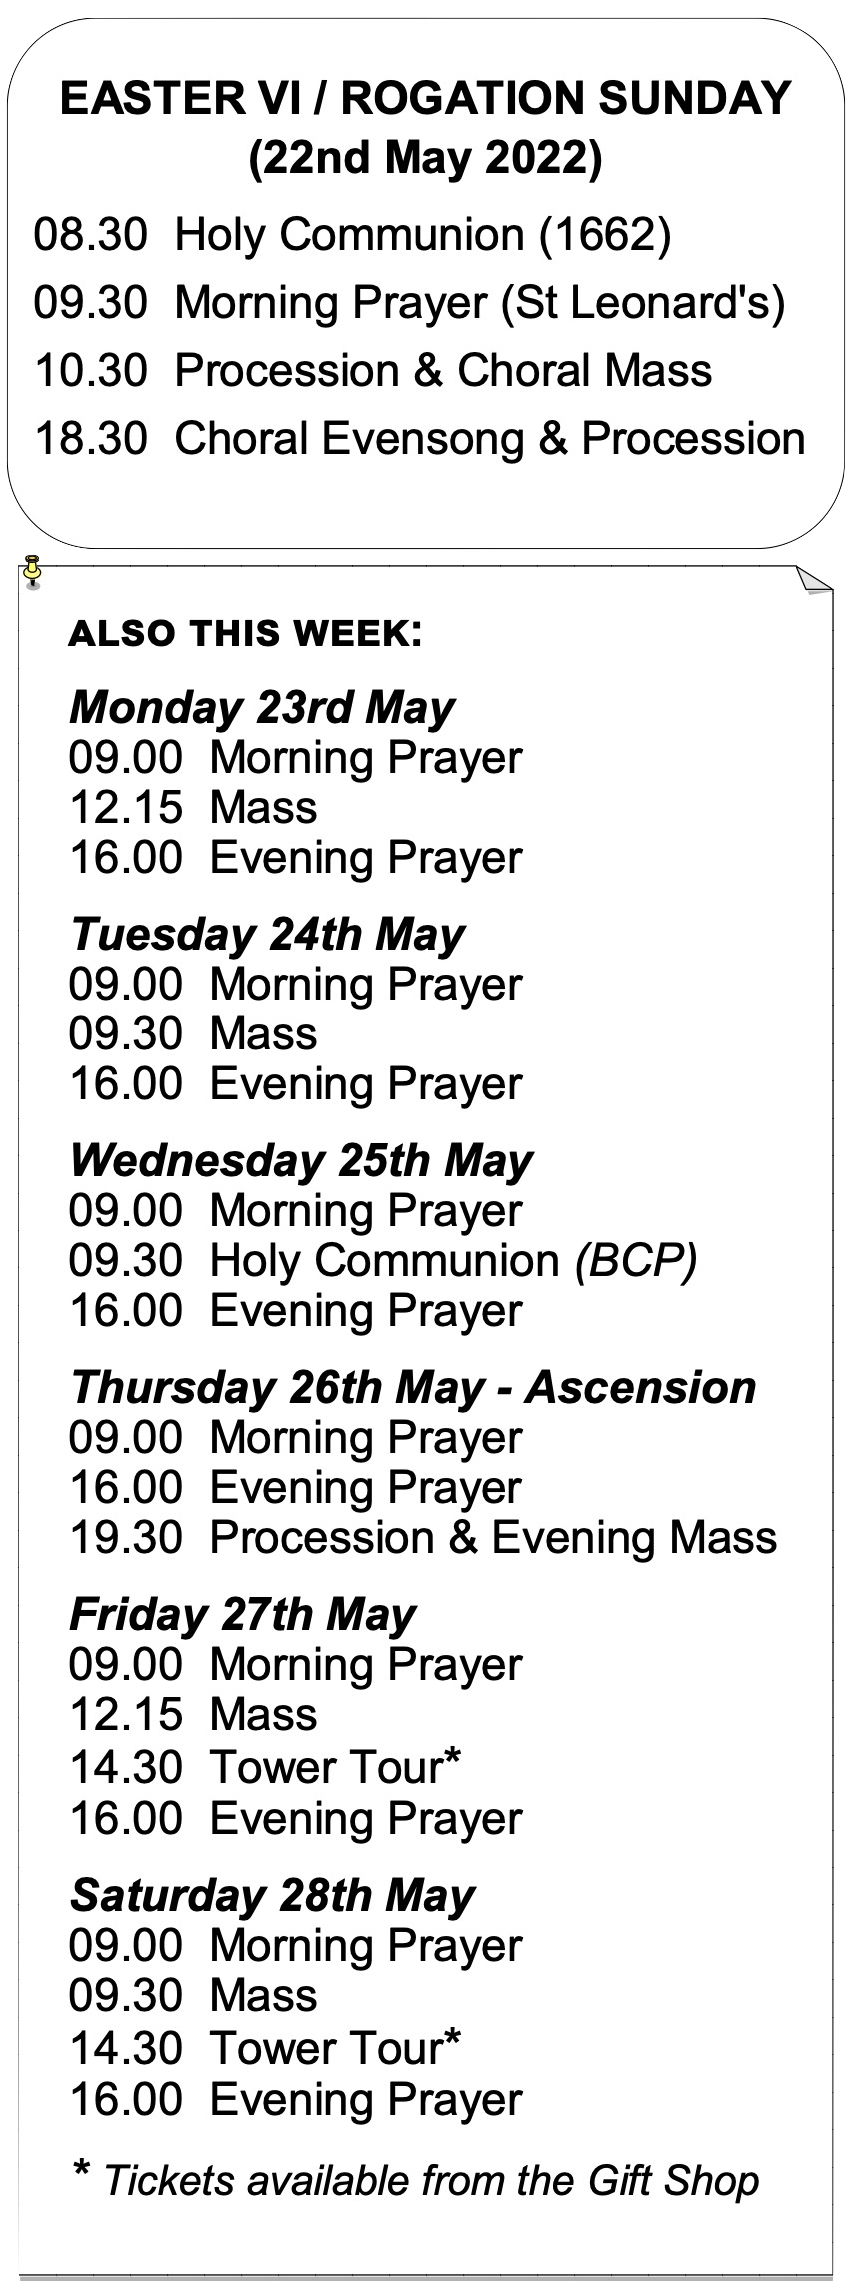 Services for Palm Sunday and Lent Week 6